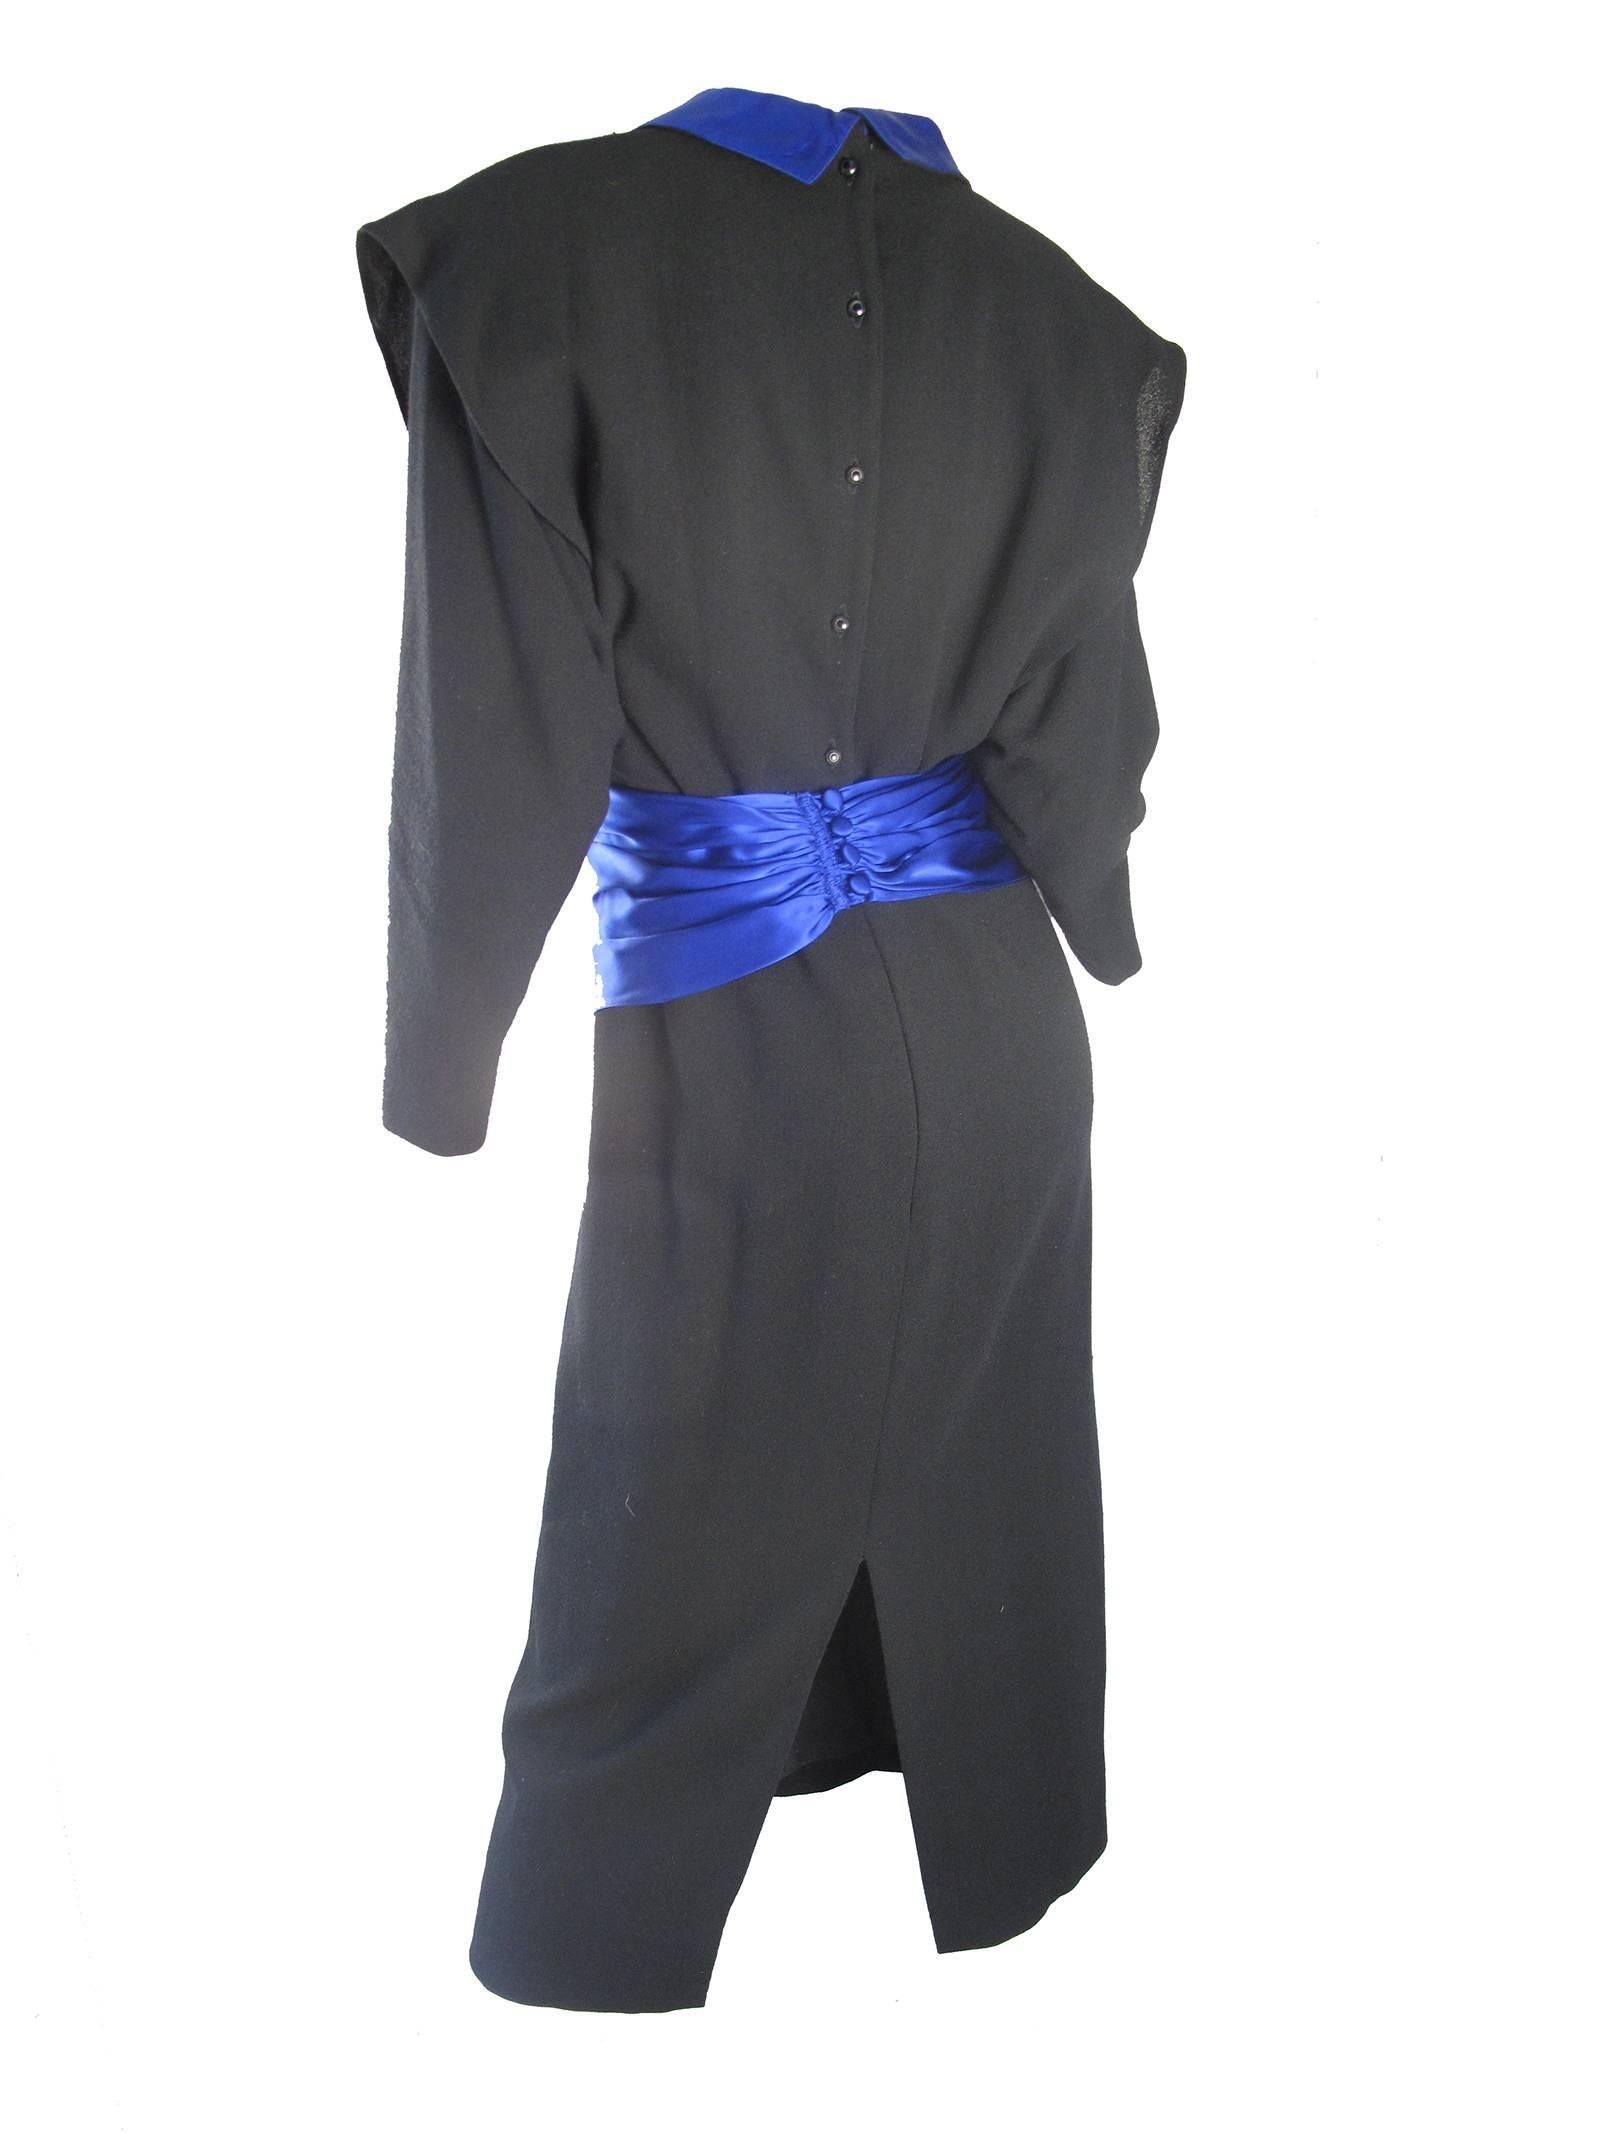 Adam Beall black wool crepe and blue satin dress.  Waist band wraps around waist and closes in back.  Condition: Excellent. Size 8
We accept returns for refund, please see our terms. We offer free ground shipping within the US. 